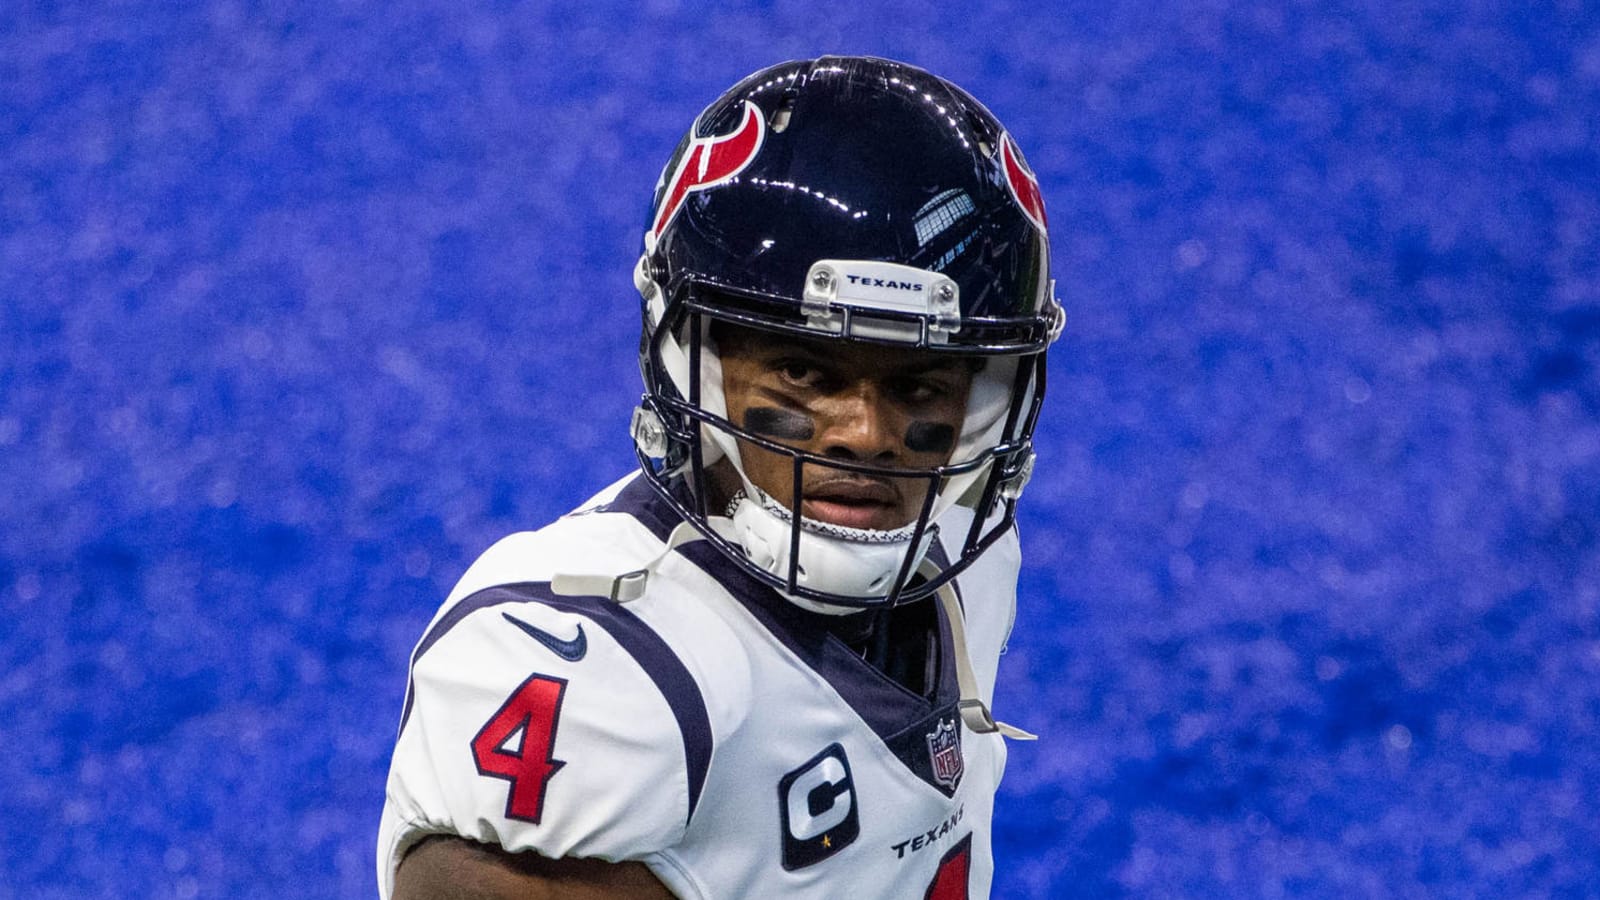 Deshaun Watson frustrated about Texans' unwillingness to trade him?